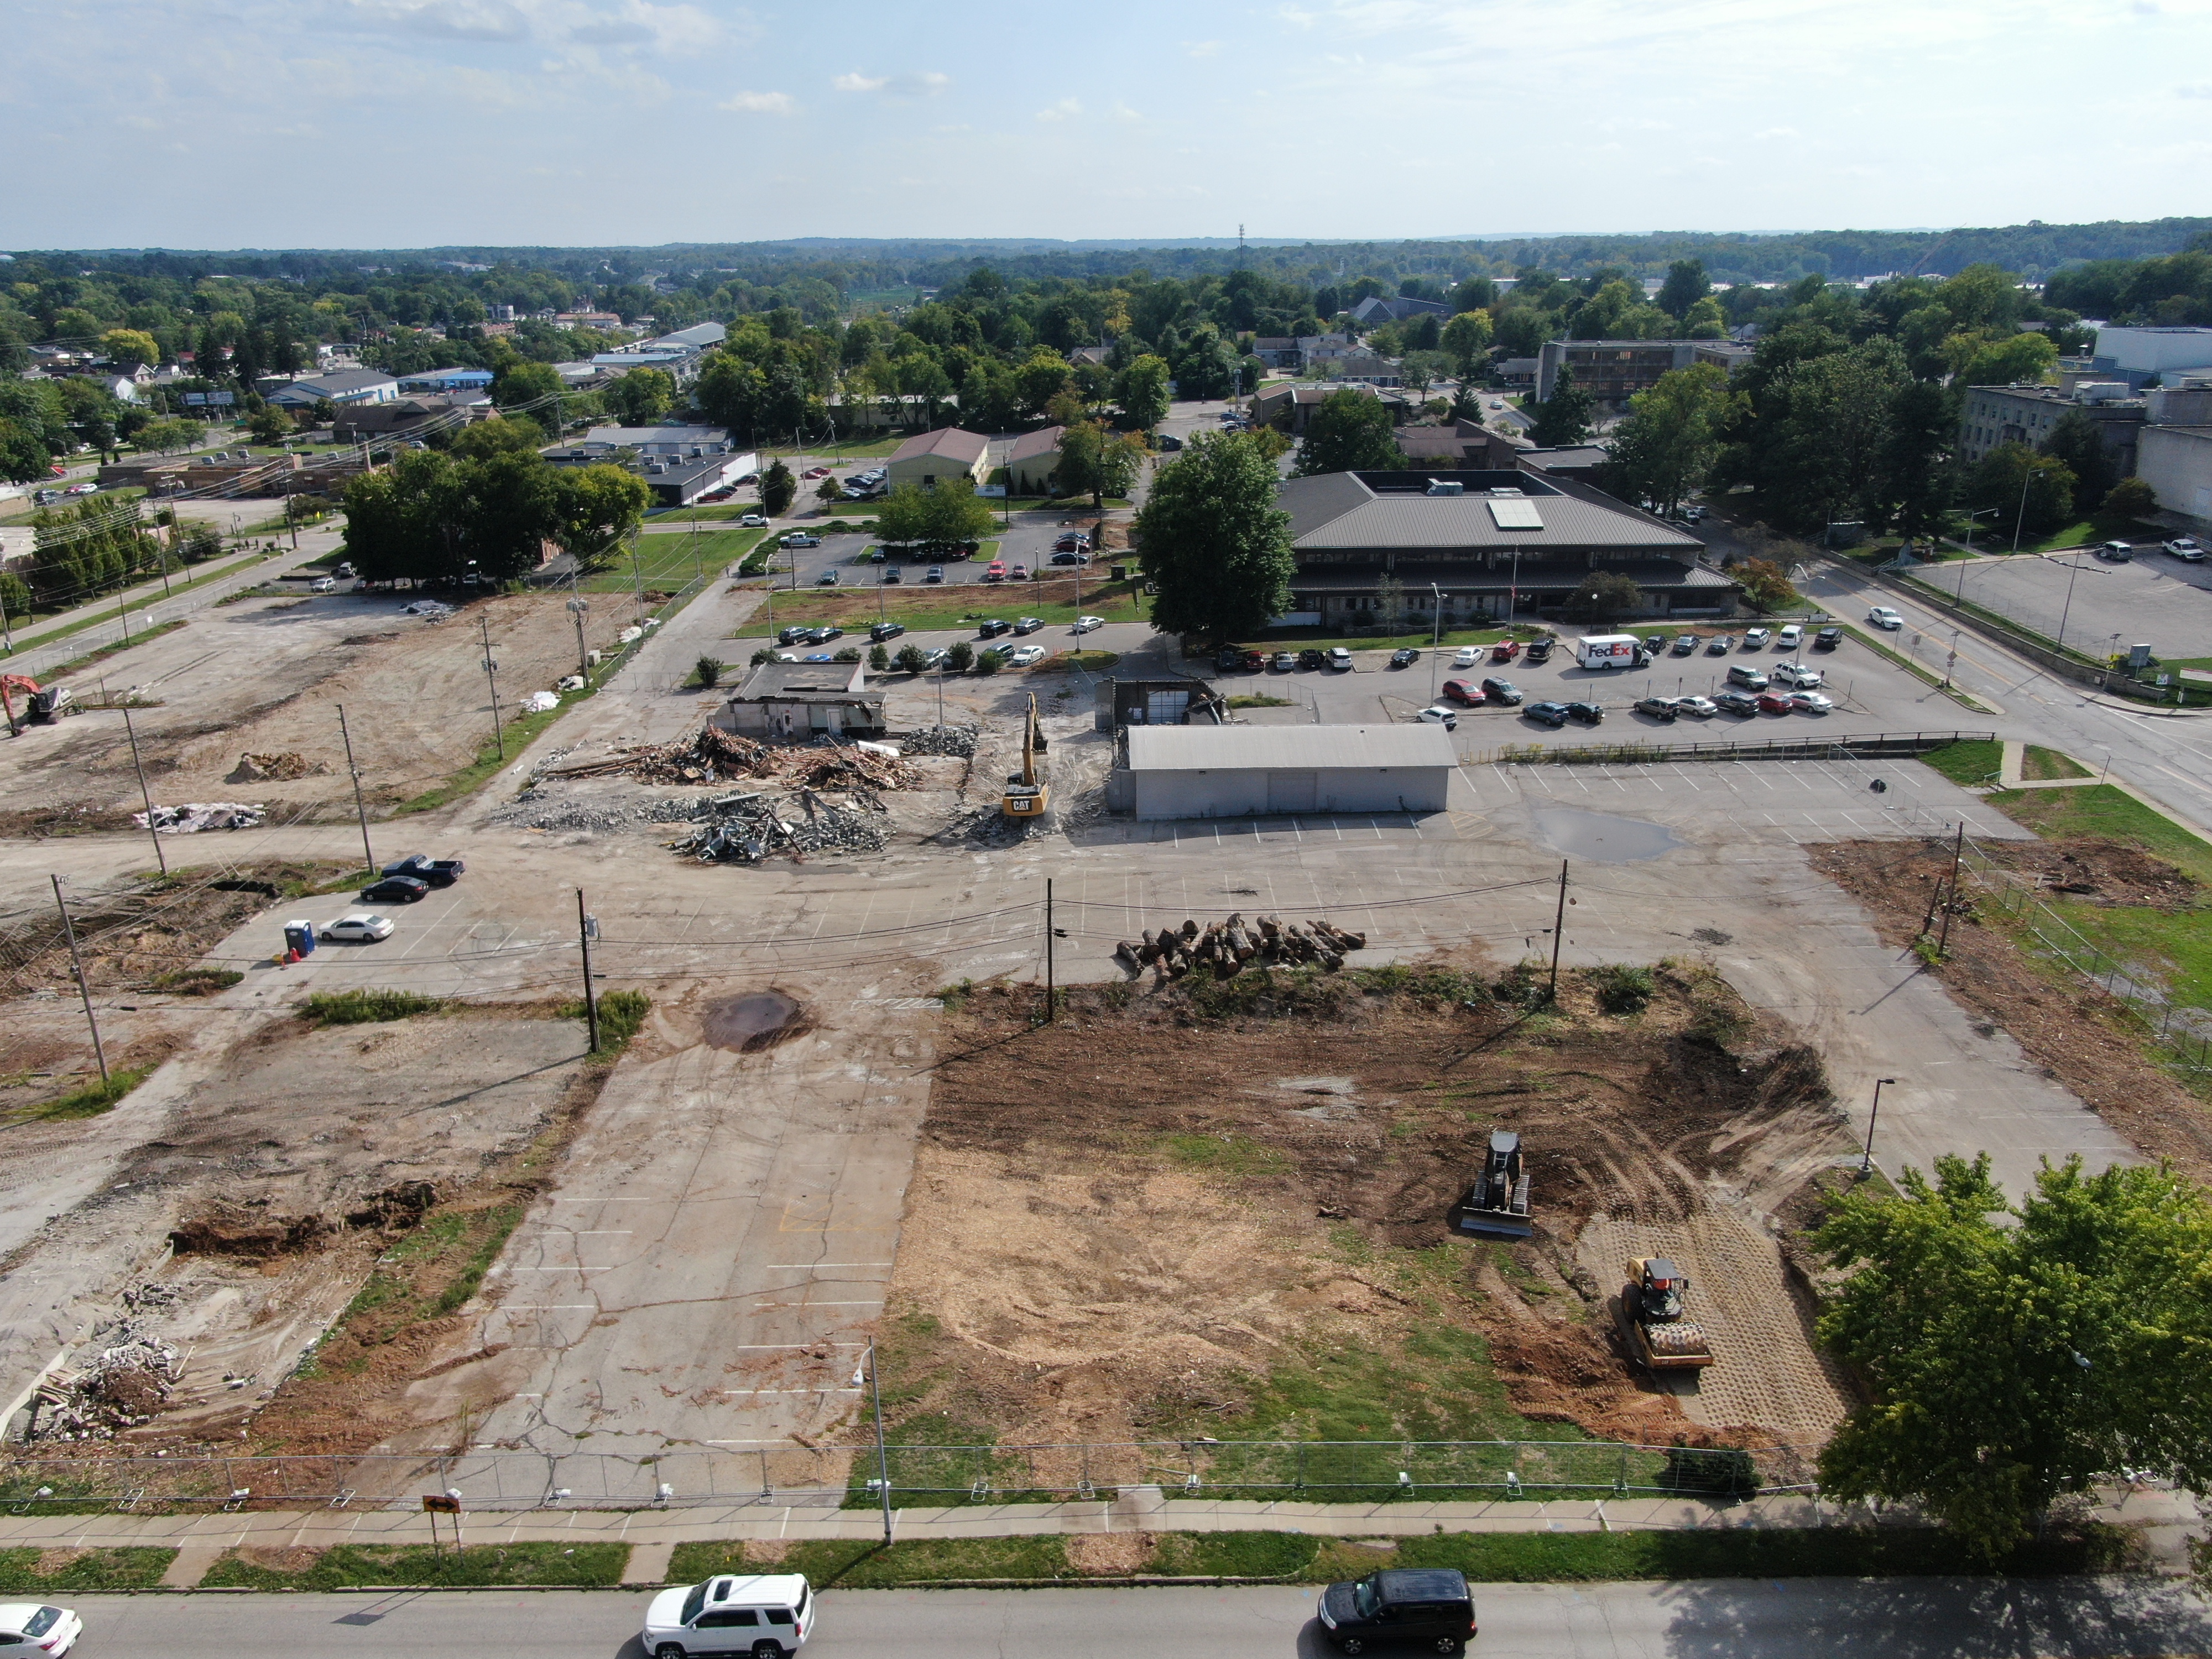 Aerial drone photo showing the development site during demolition. The left photo is looking south from the intersection of 2nd and Madison Street, there is a bulldozer and sheepsfoot roller preparing the exposed earth and an excavator demolishing a warehouse.